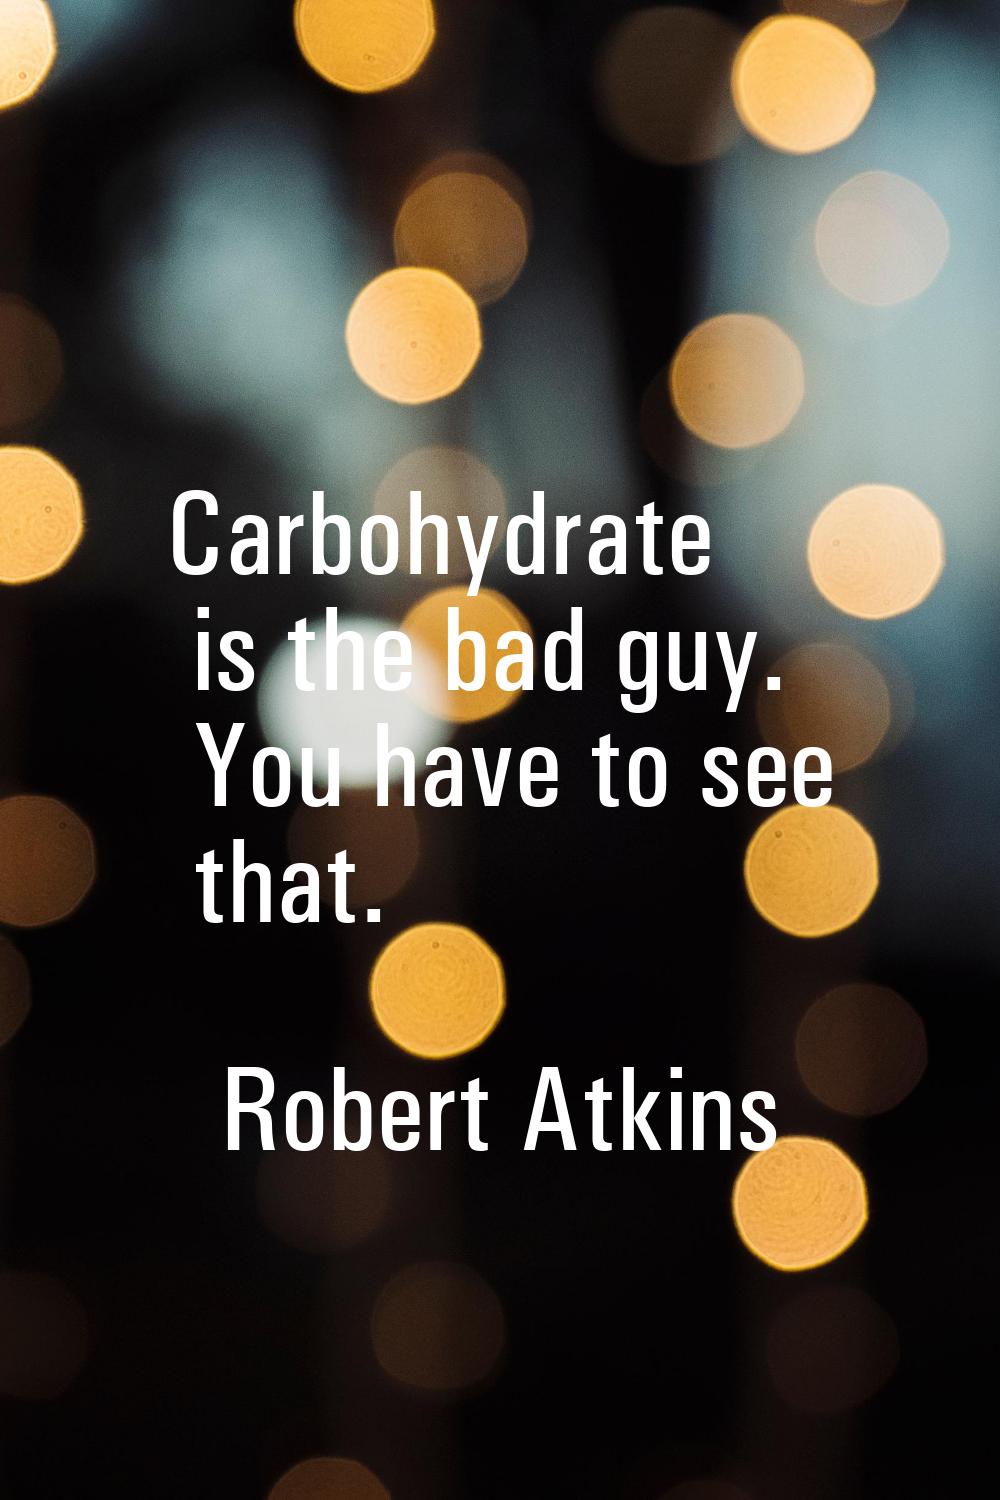 Carbohydrate is the bad guy. You have to see that.